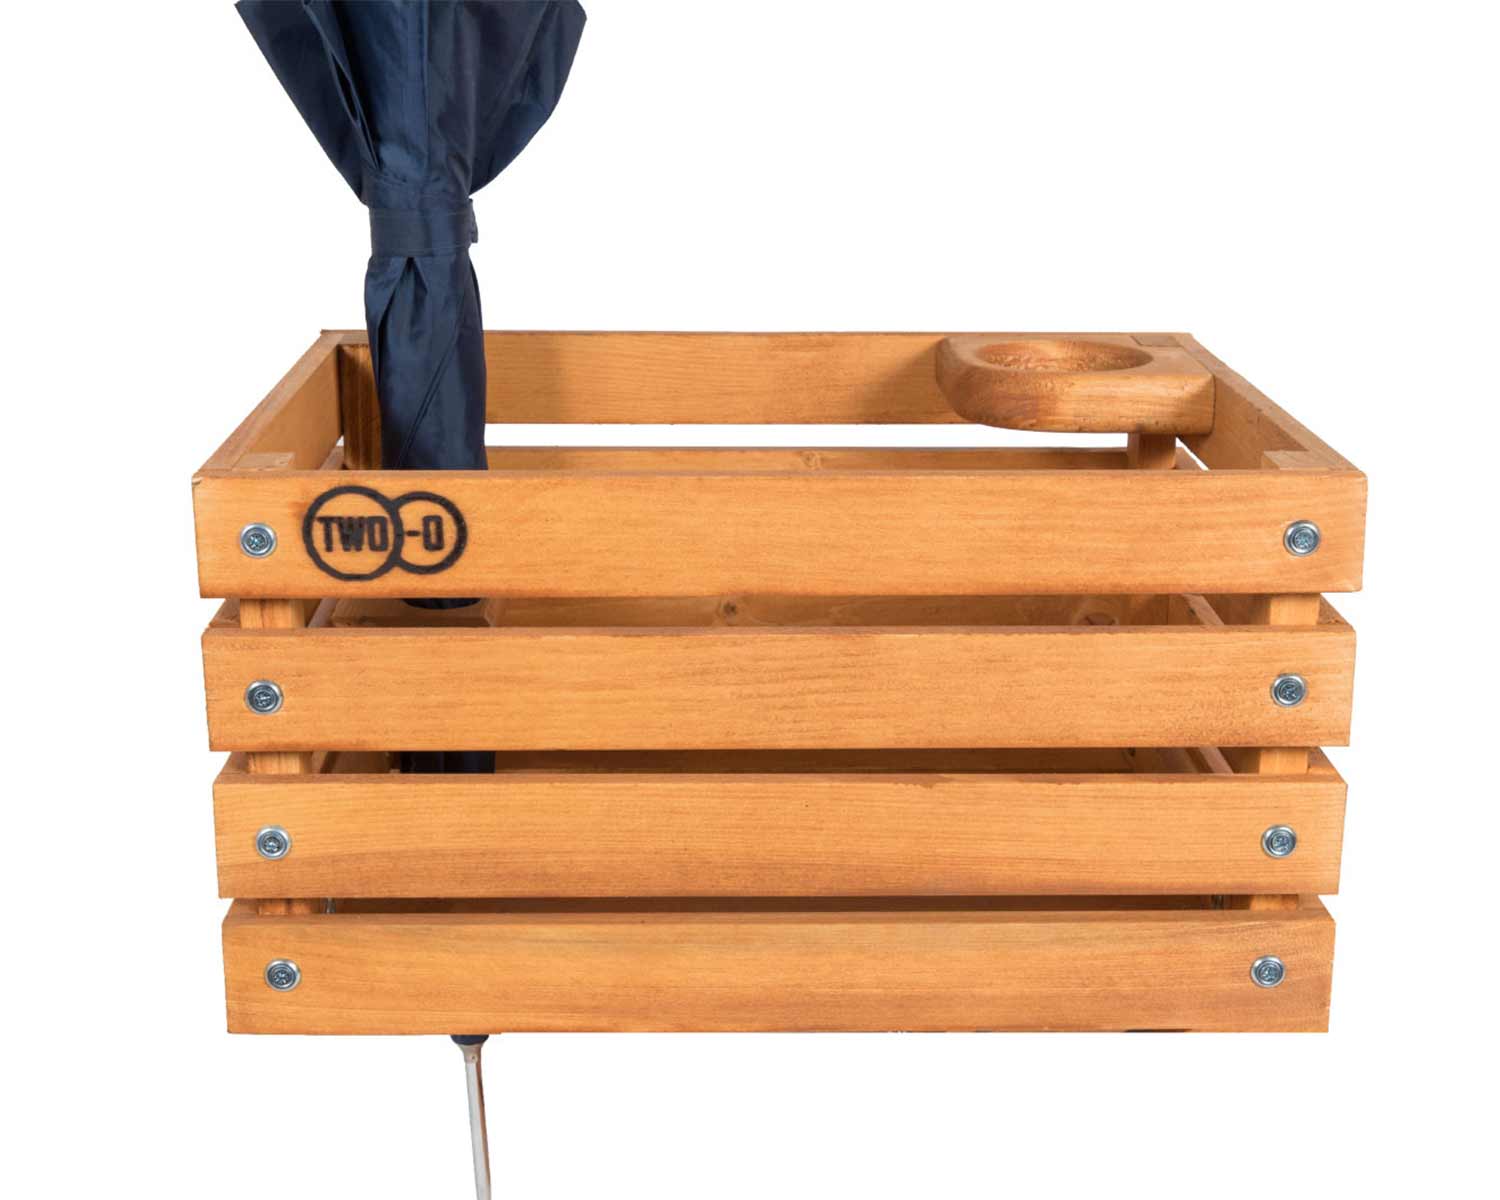 bicycle cratestwo o wooden bike crate the stormchaser 3